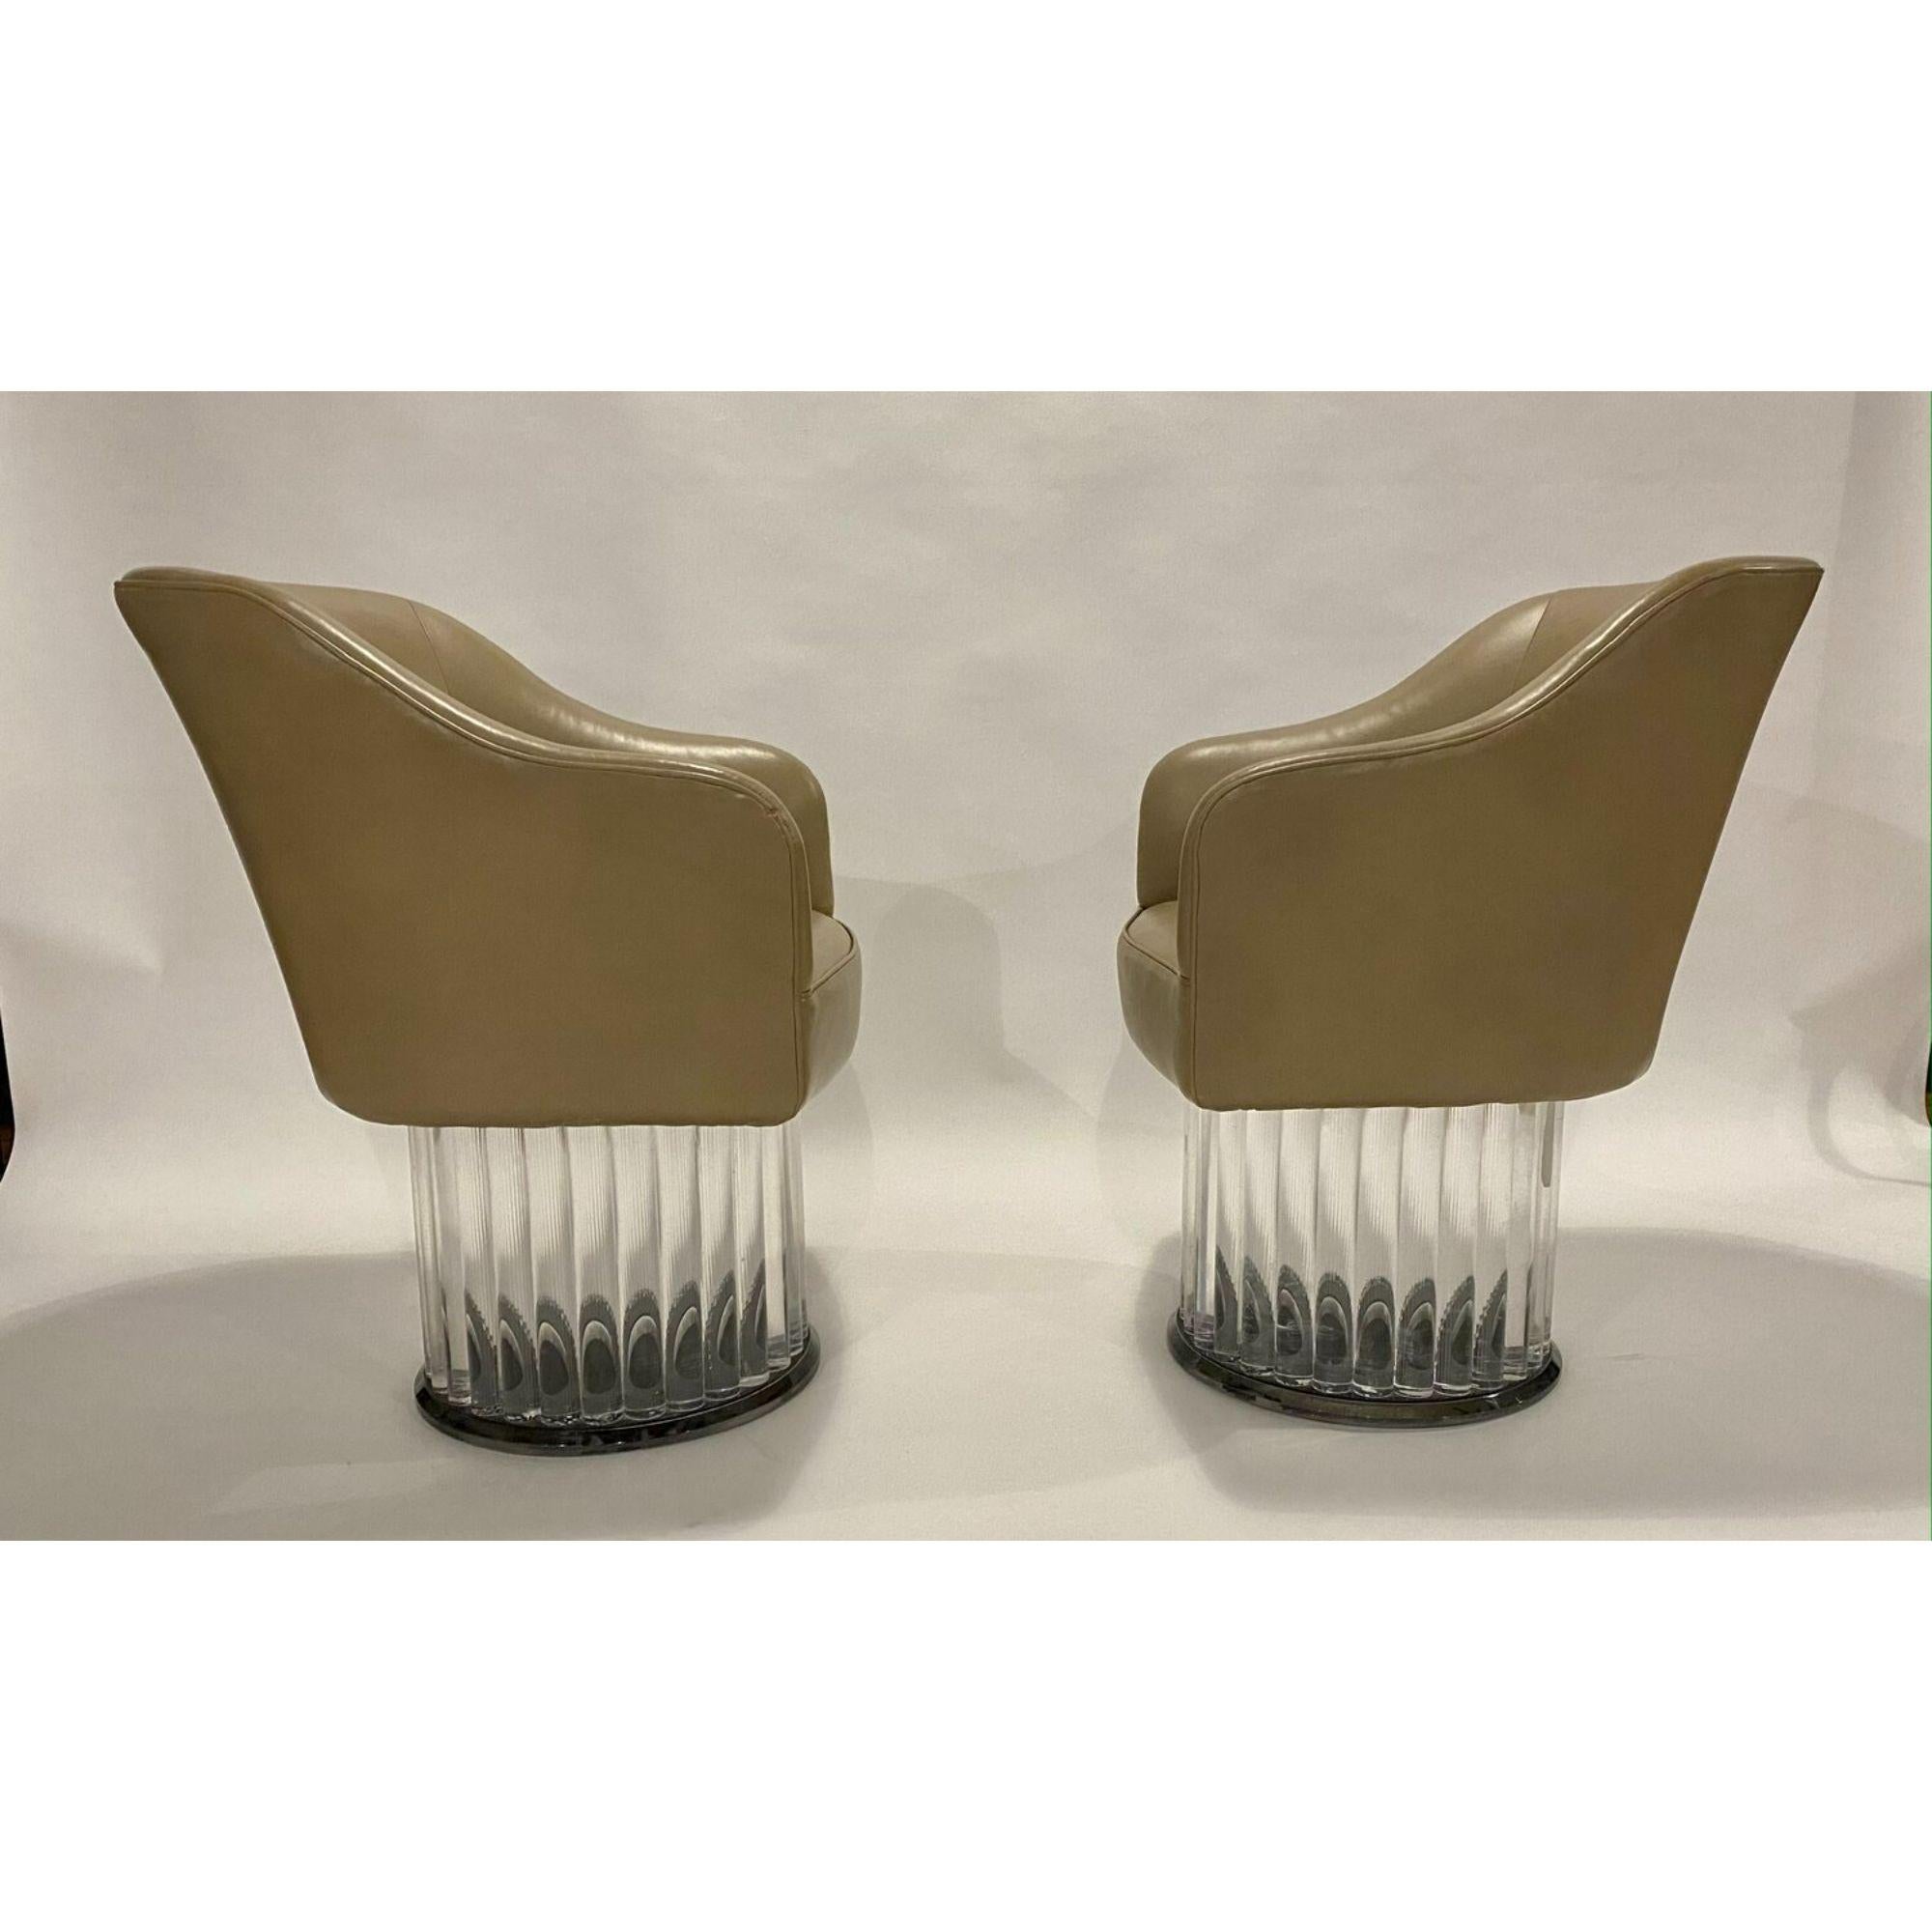 Barrel swivel arm chairs on lucite base in original taupe leather. Listing is for the pair but there is a third chair available. Age appropriate wear on leather and light surface scratches on lucite base..

Materials: Leather, Lucite
Color: